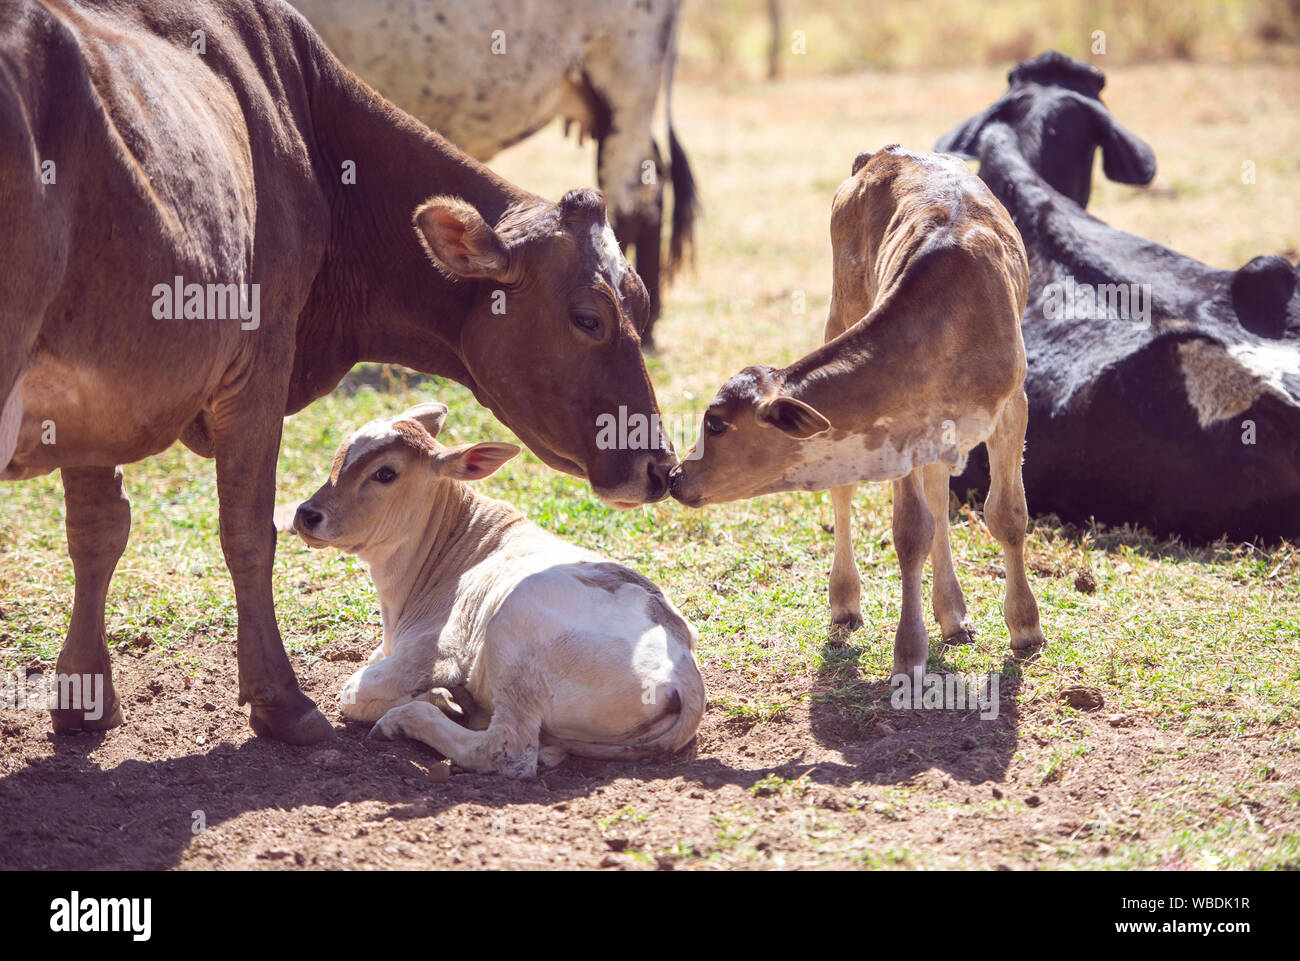 Rural image. Mother cow taking care of newborn calf. Concept image of farm life. Stock Photo